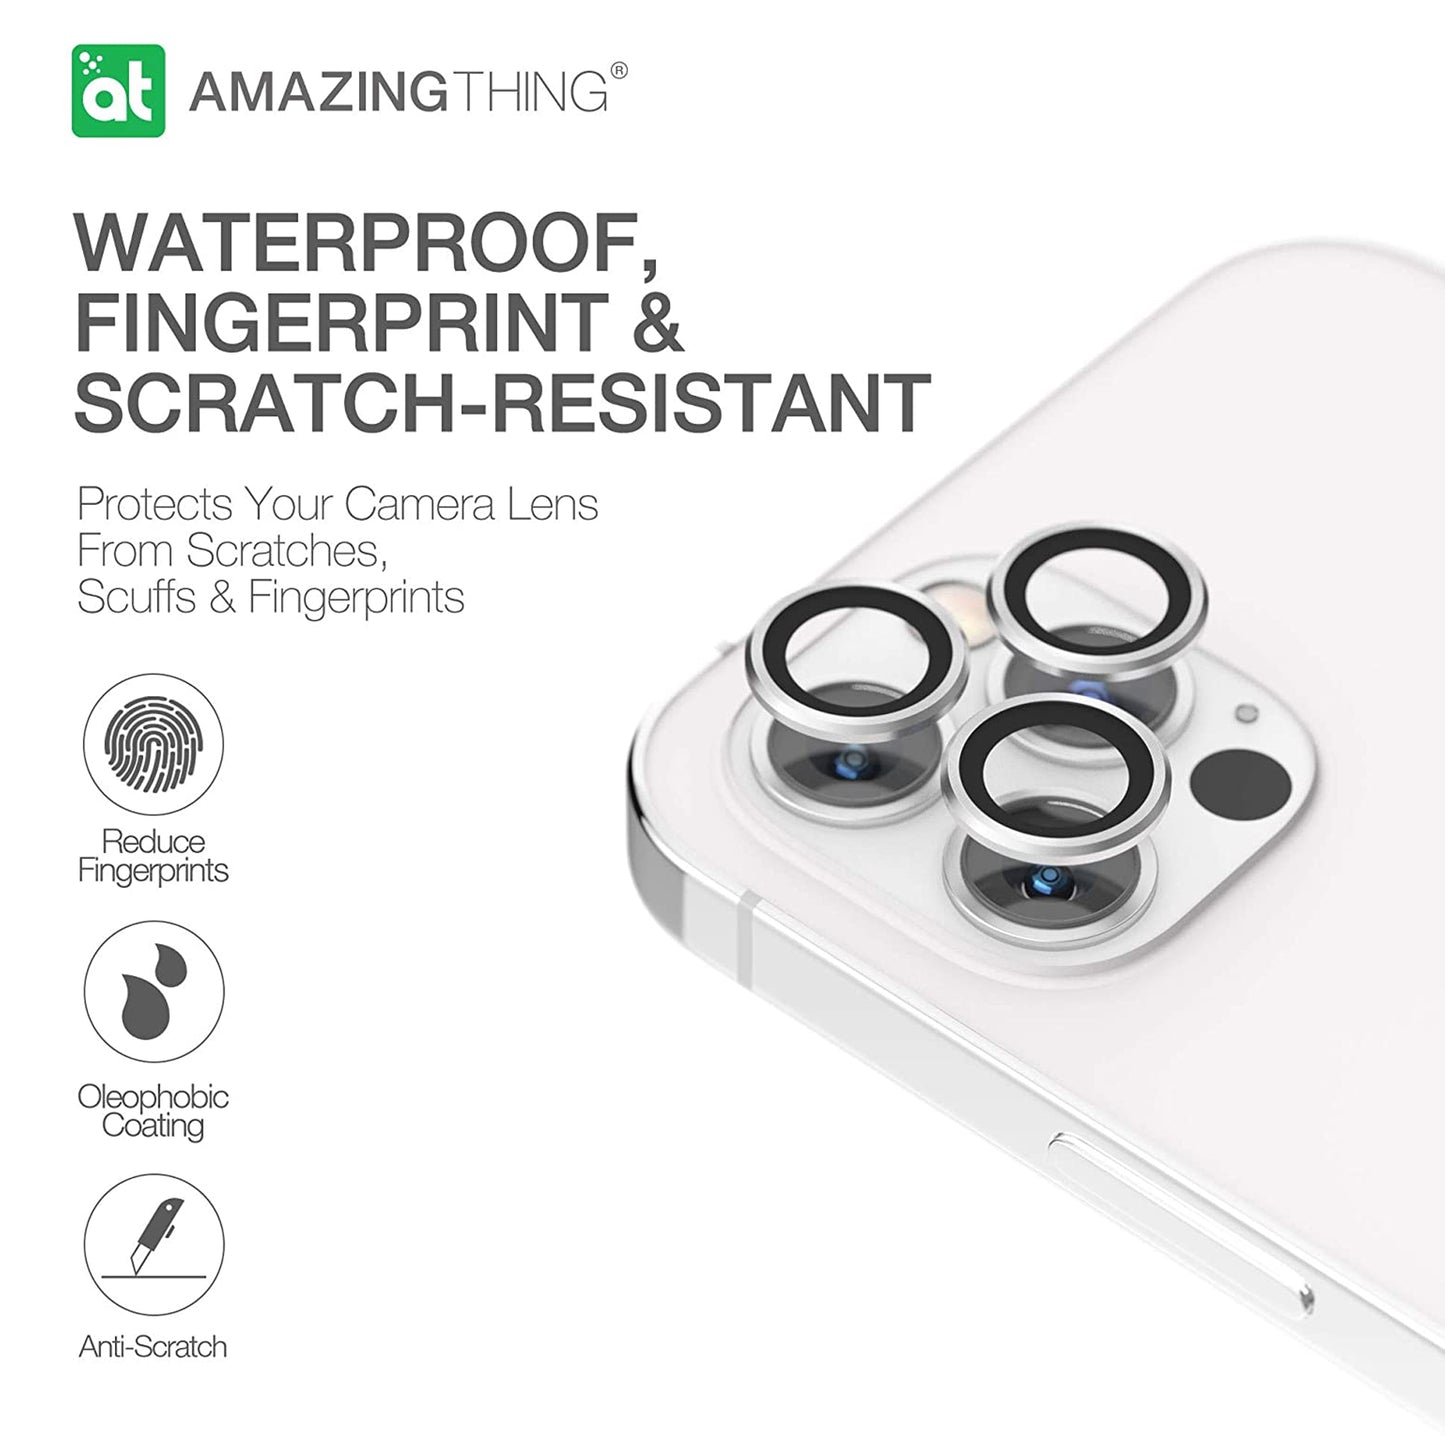 AMAZINGthing SUPREME AR 3D LensGlass Protector for iPhone 13 Pro 6.1" 5G ( Three Lens ) - Silver (Barcode: 4892878069502 )